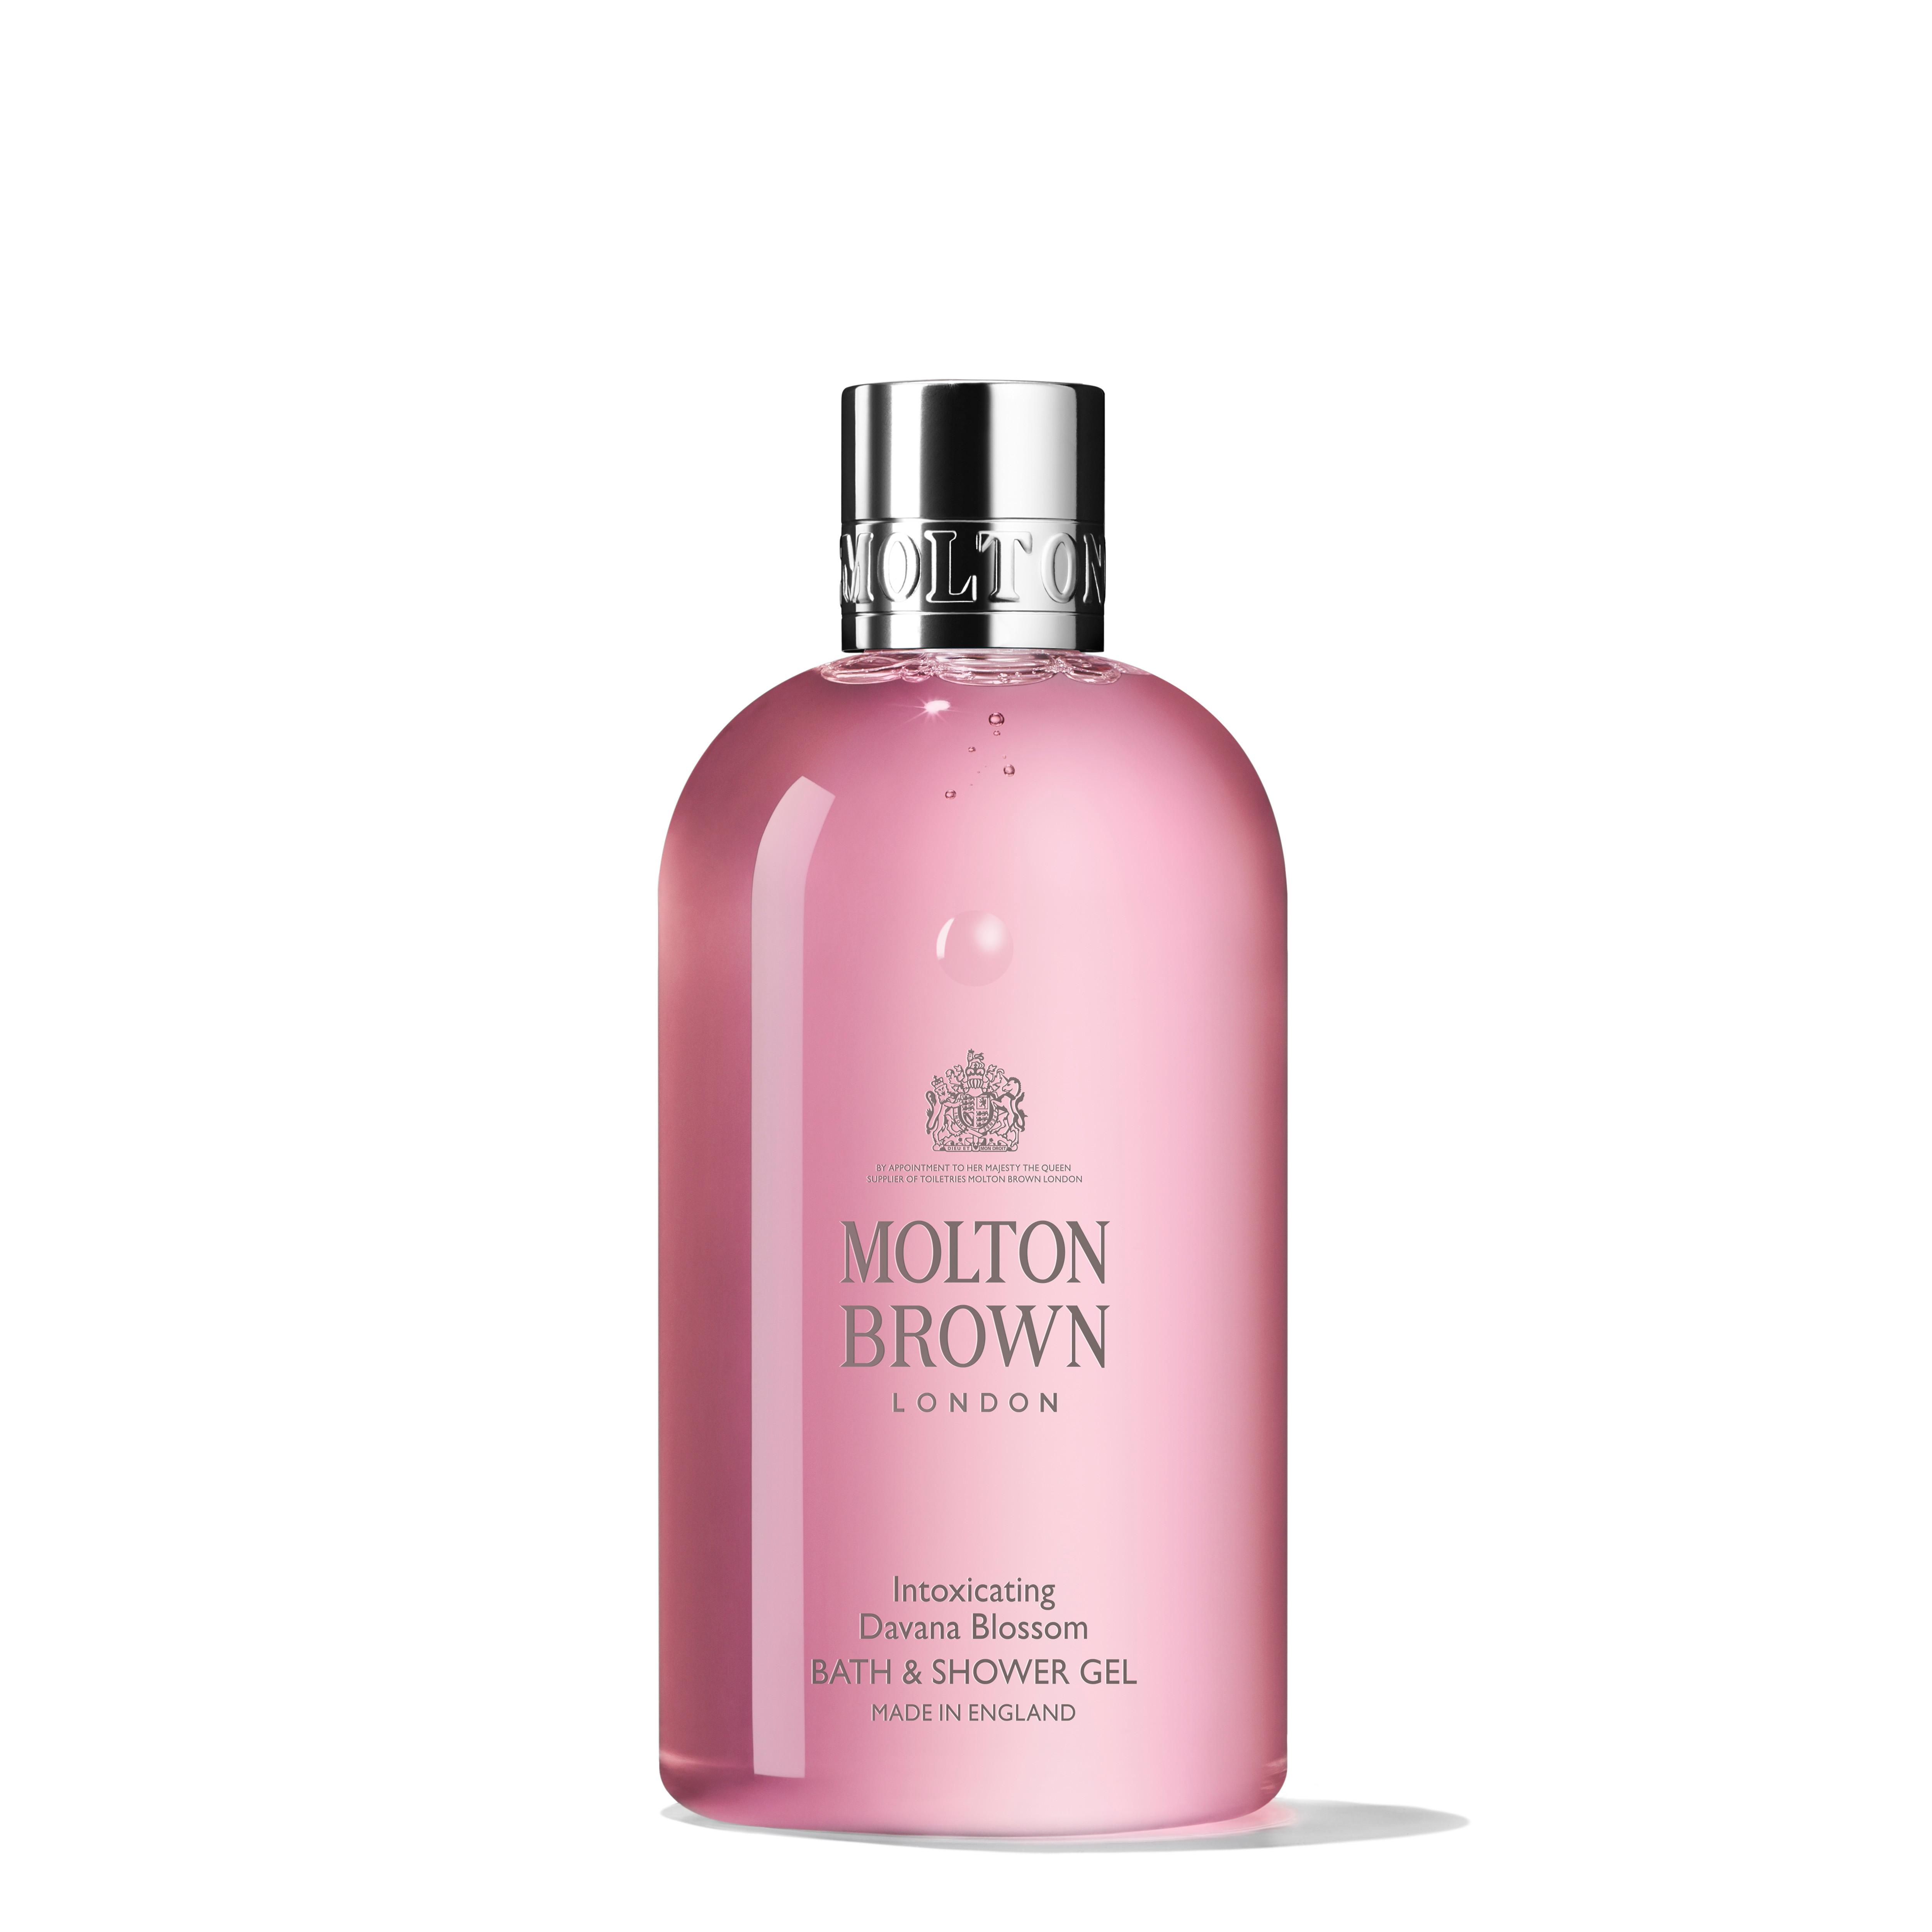 Molton Brown OUTLET Intoxicating Davana Blossom Bath & Shower Gel